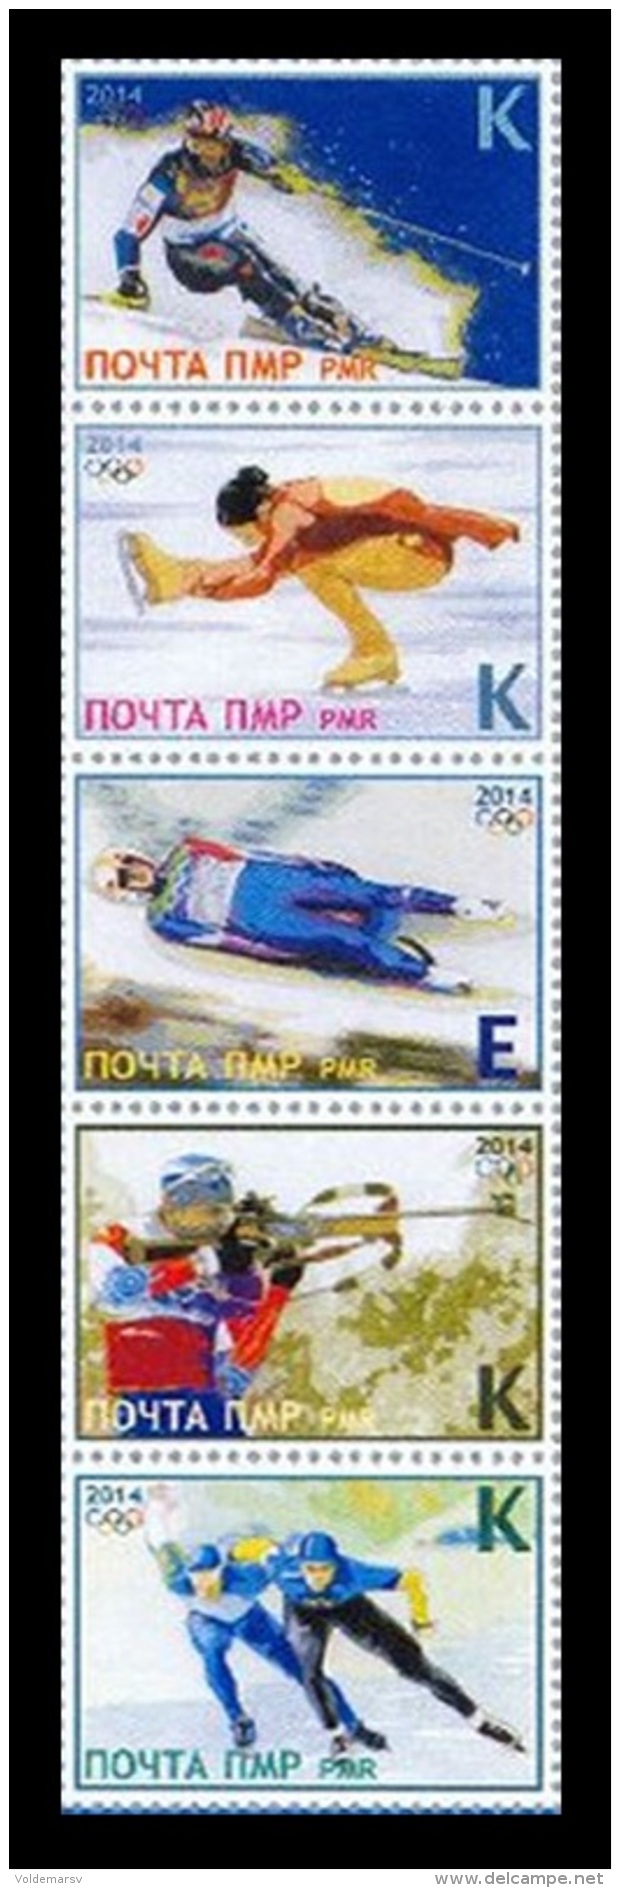 Moldova (Transnistria) 2014 #509/13 Russia Team - Winner Of Olympic And Paralympic Games In Sochi MNH ** - Moldova